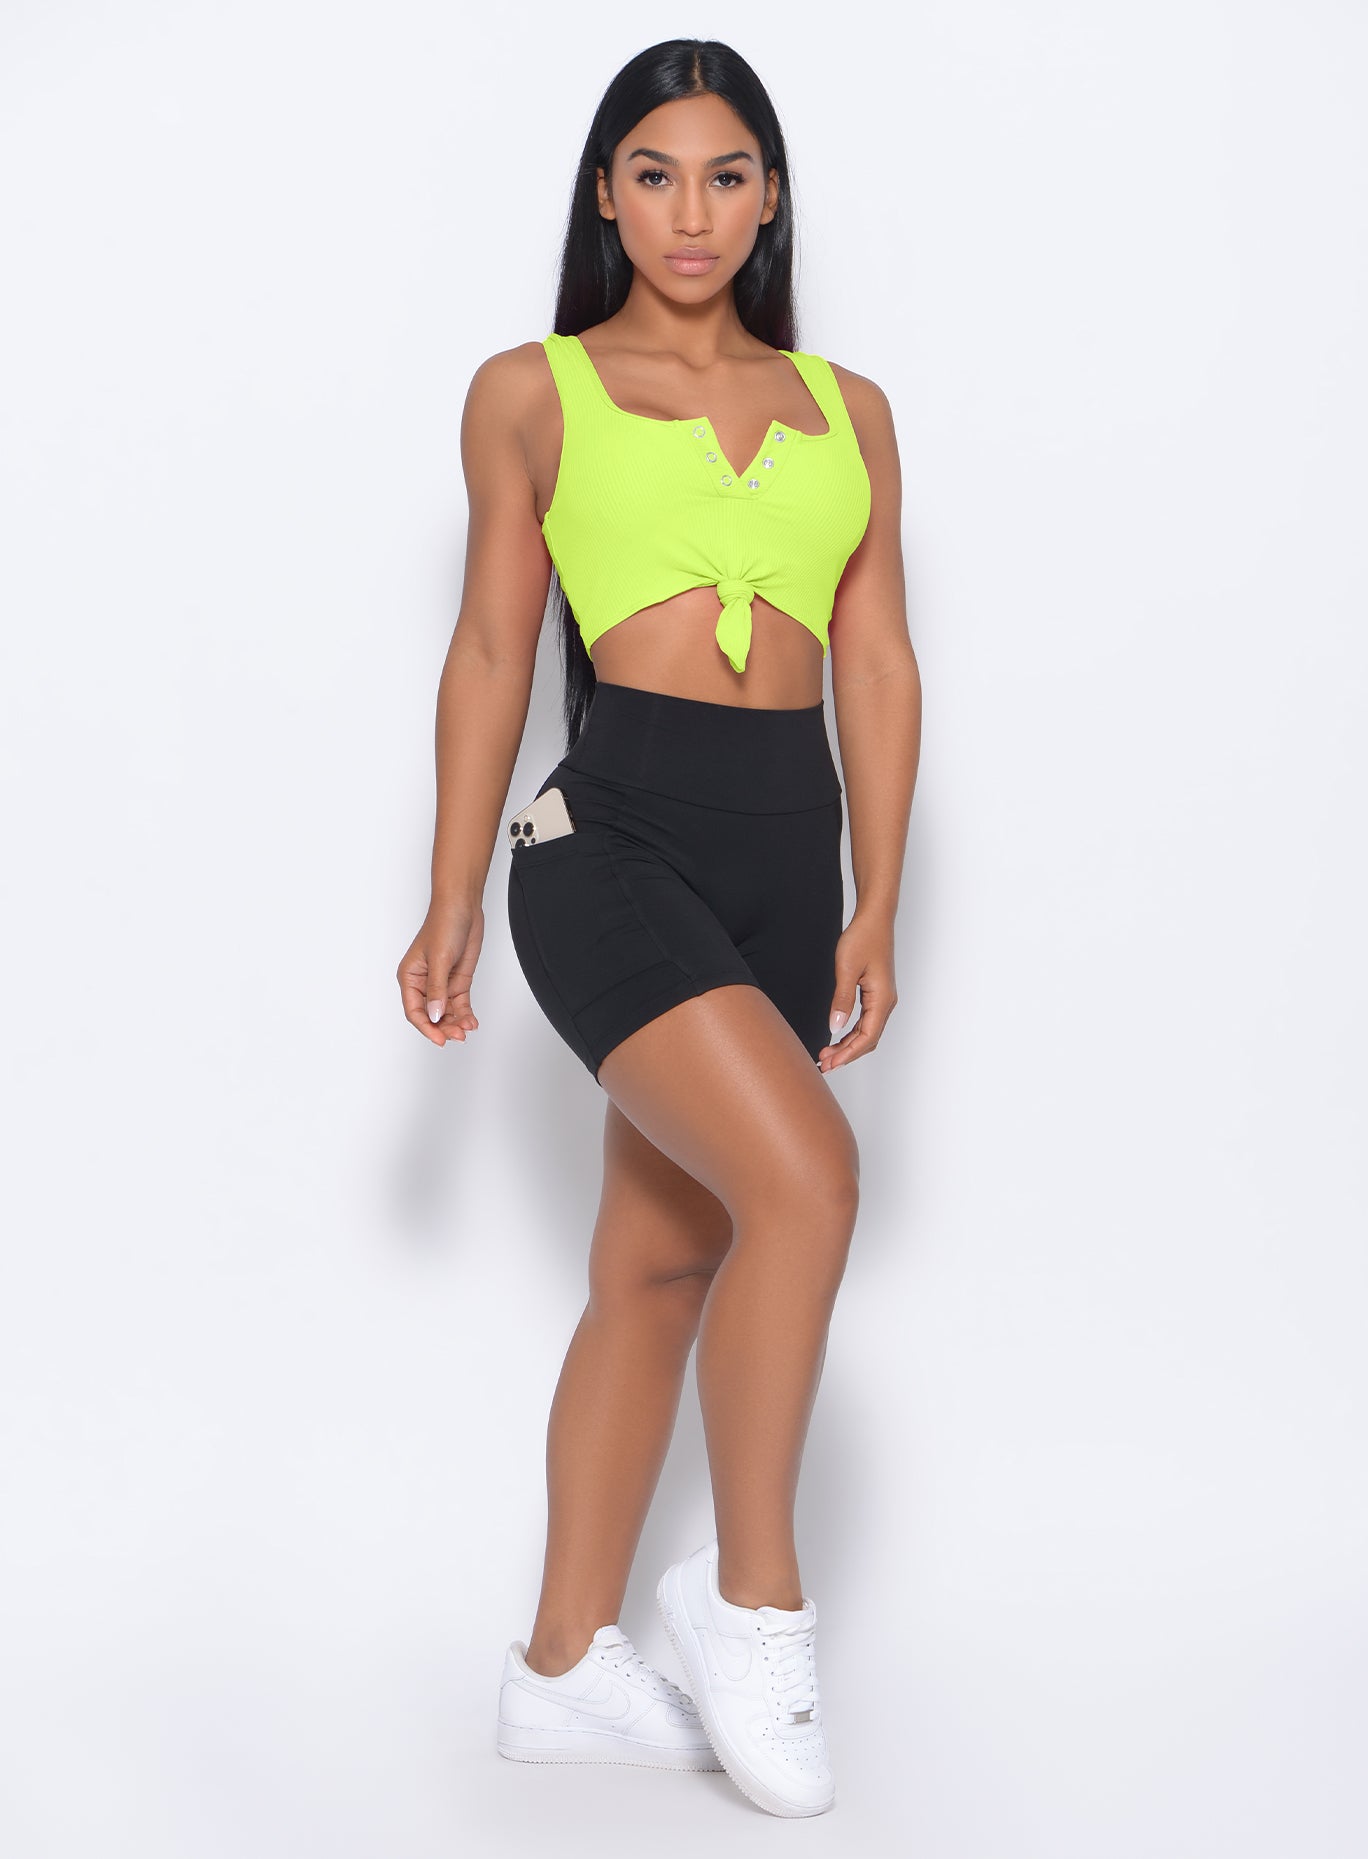 A picture of a model facing forward wearing our henley sports bra in neon yellow and a black shorts